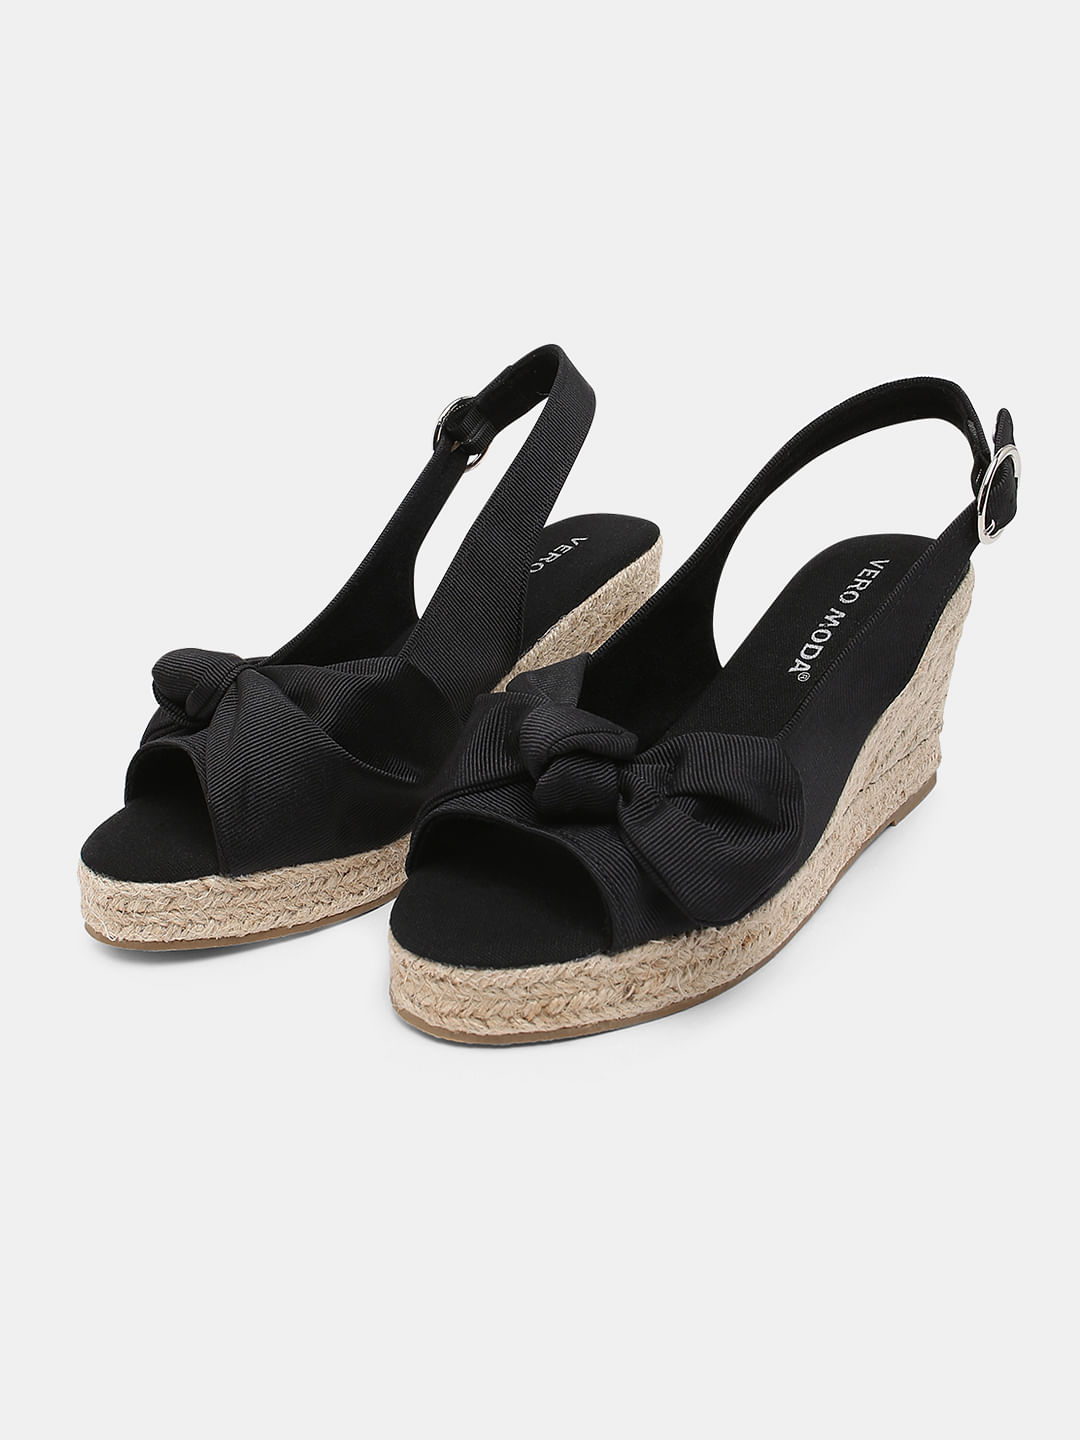 Discover 70+ 2 inch espadrille wedge sandals latest